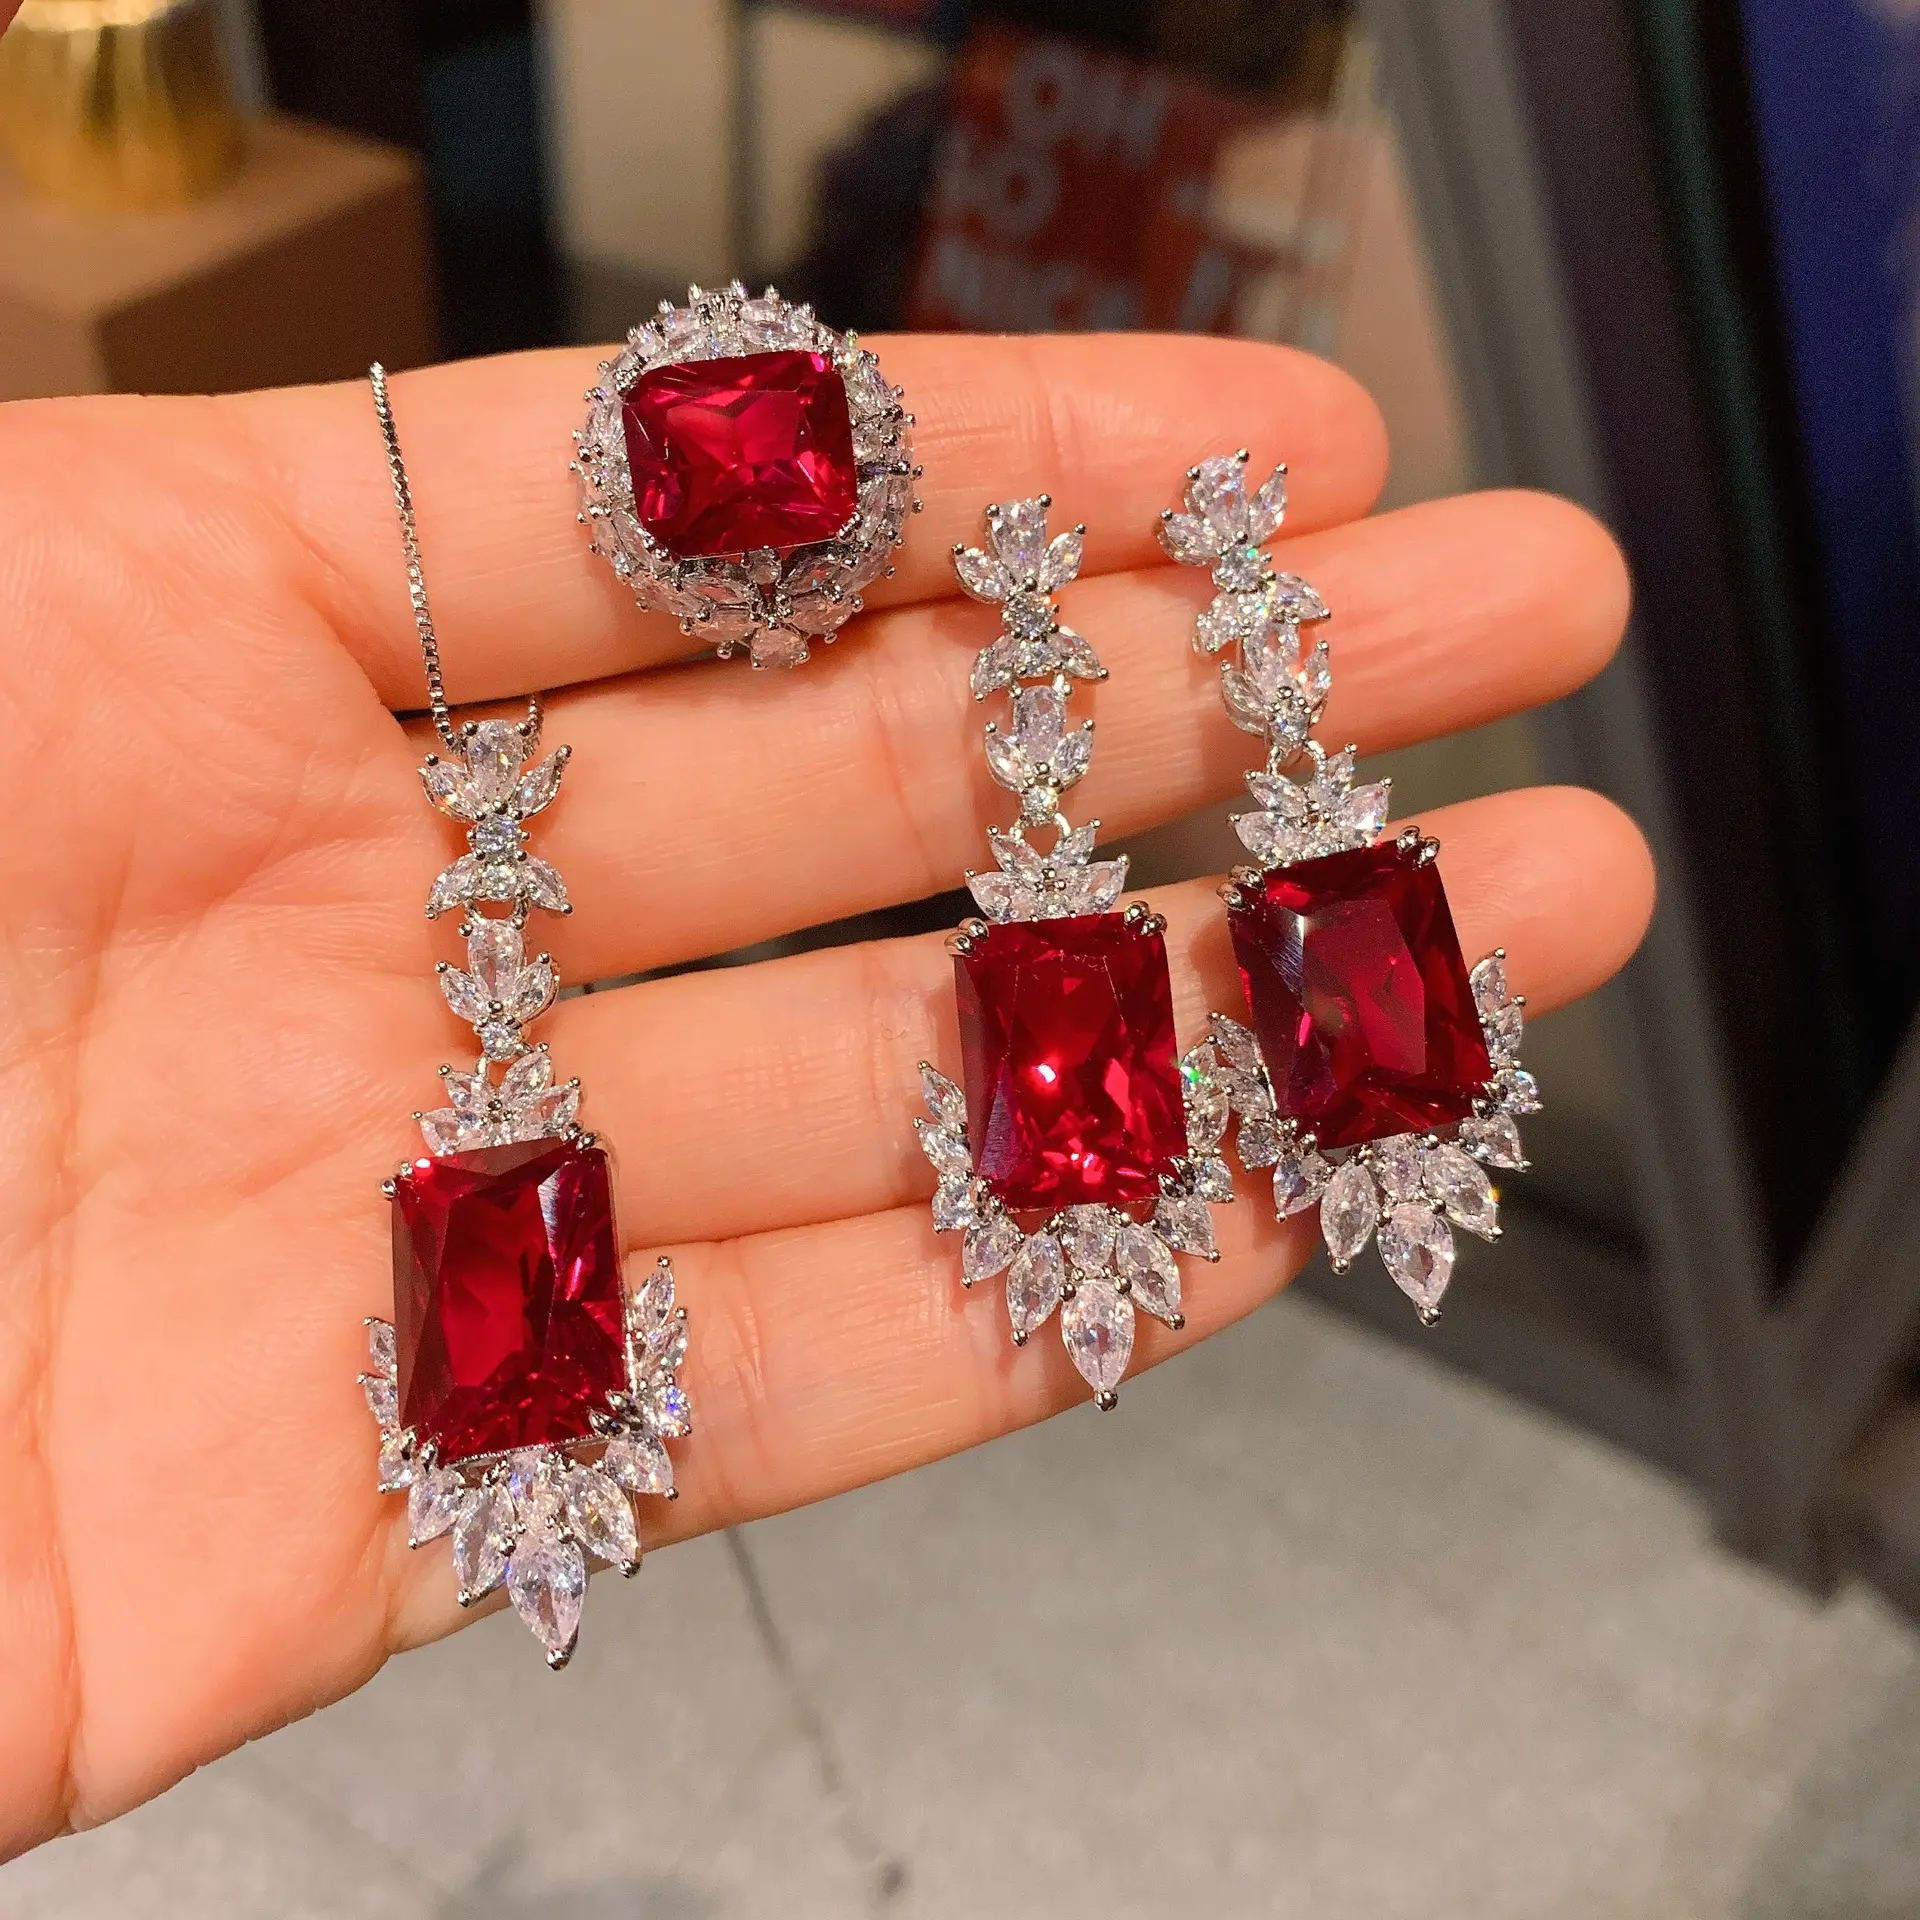 Fashion Floral Bridal Jewelry Sets Charm Red Crystal Rhinestone Necklace Earrings Ring Wedding Jewelry Sets for Women Party